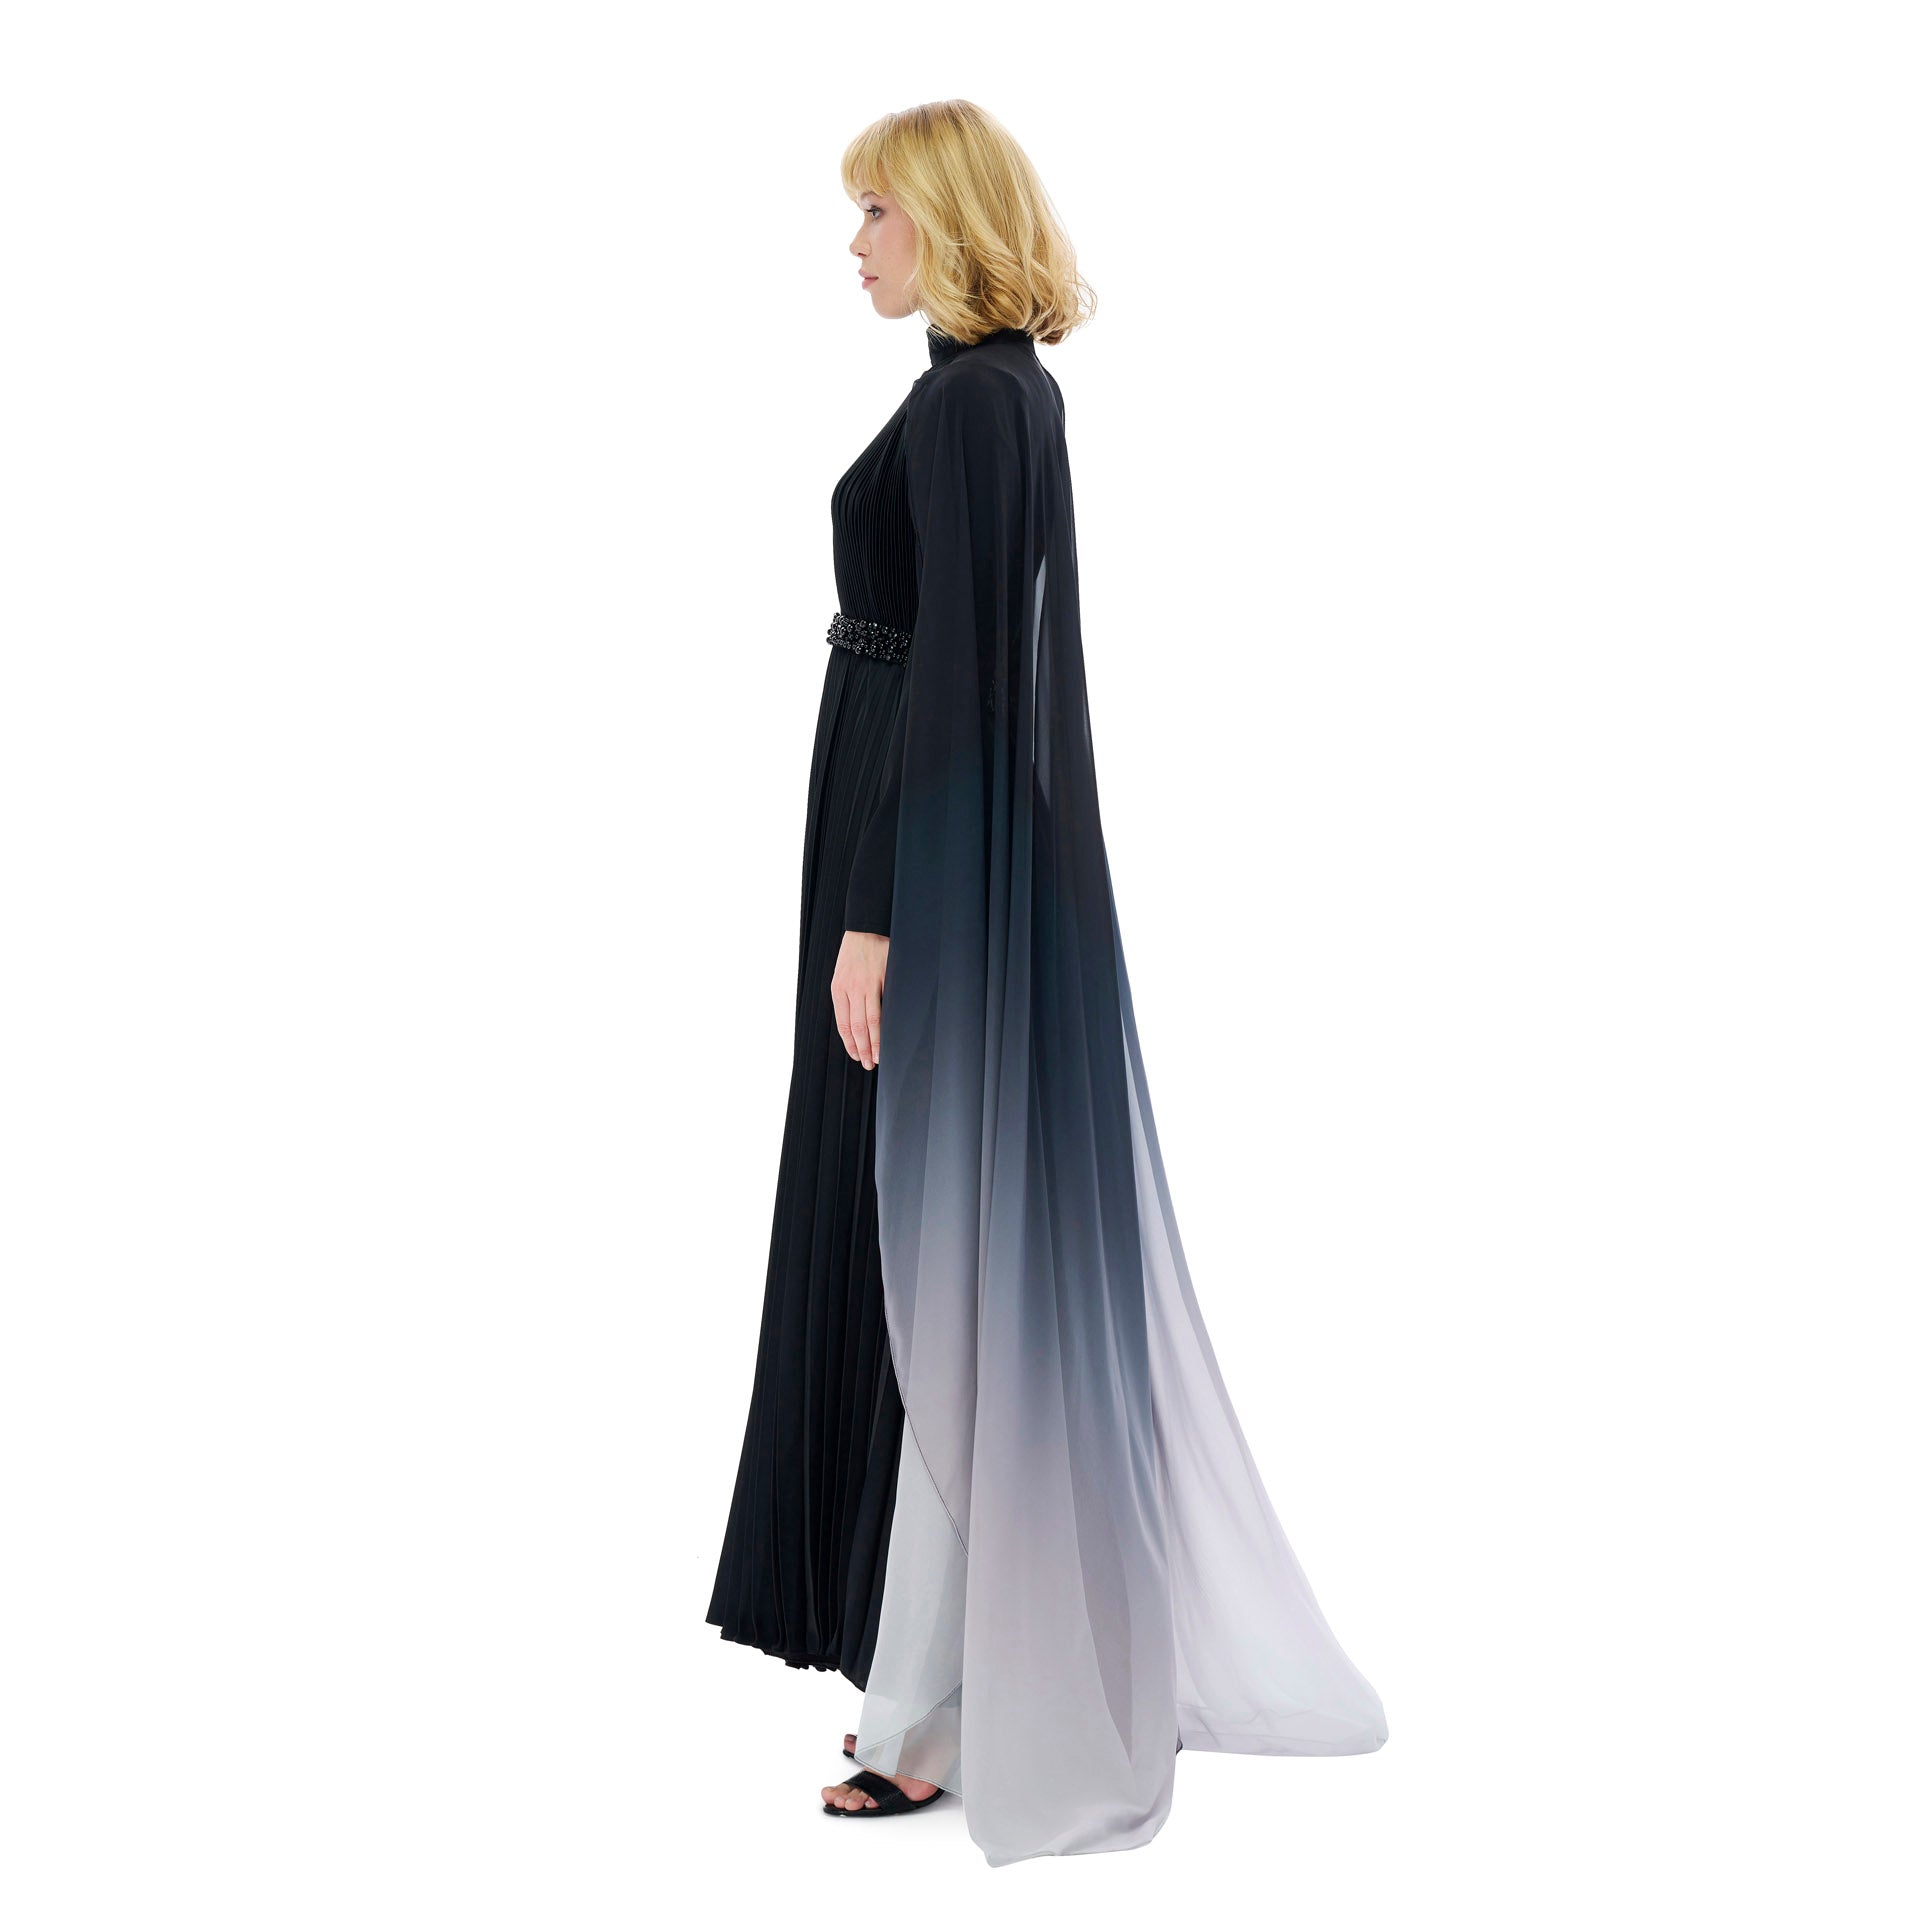 Black Ogee Pleated Crepe Dress From Miha